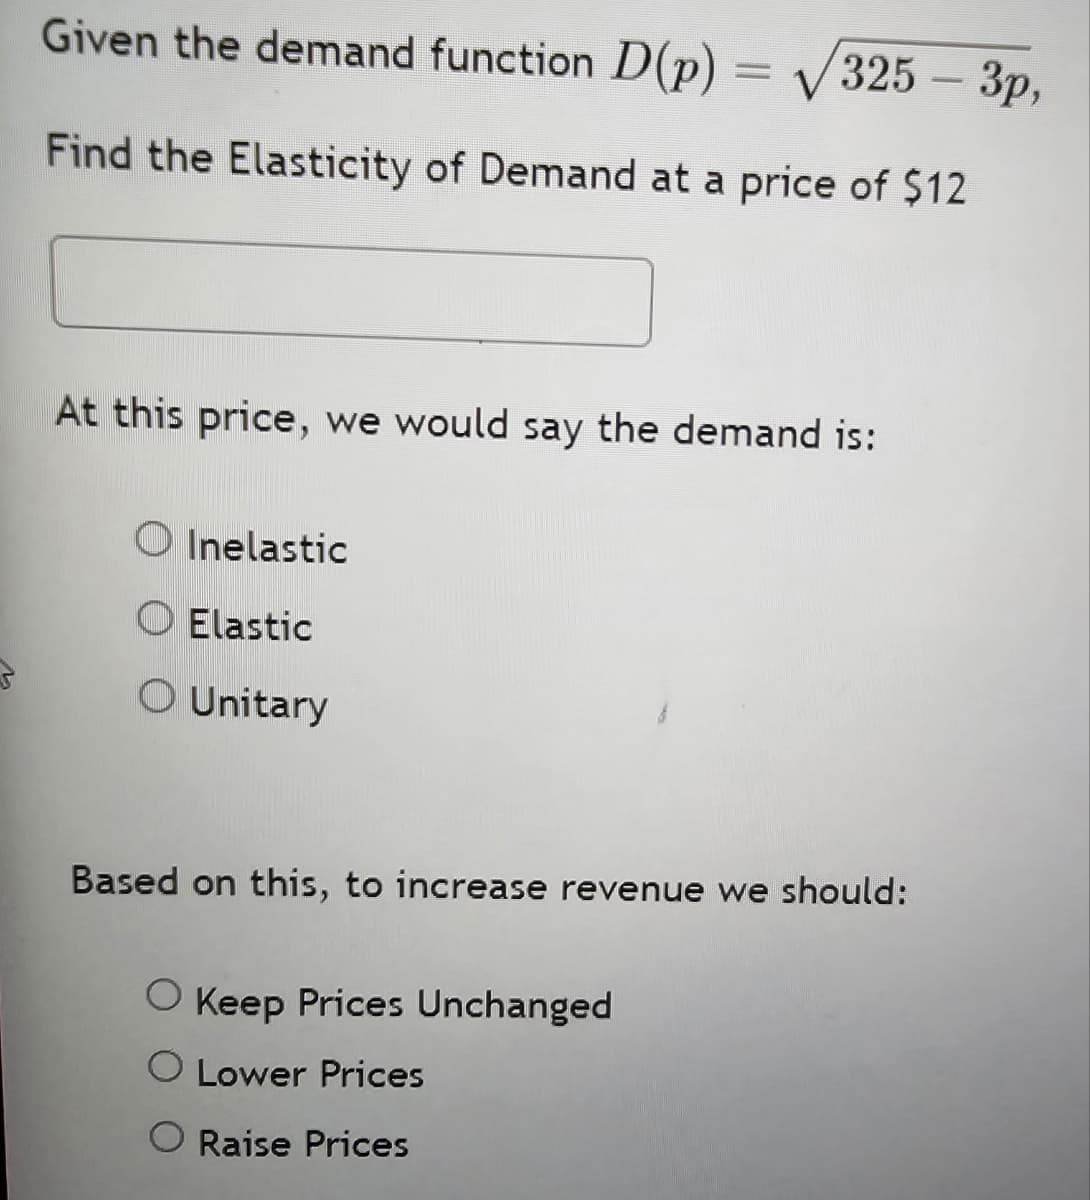 Given the demand function D(p) = √√√325 - 3p,
Find the Elasticity of Demand at a price of $12
At this price, we would say the demand is:
Inelastic
Elastic
○ Unitary
Based on this, to increase revenue we should:
◇ Keep Prices Unchanged
O Lower Prices
◇ Raise Prices